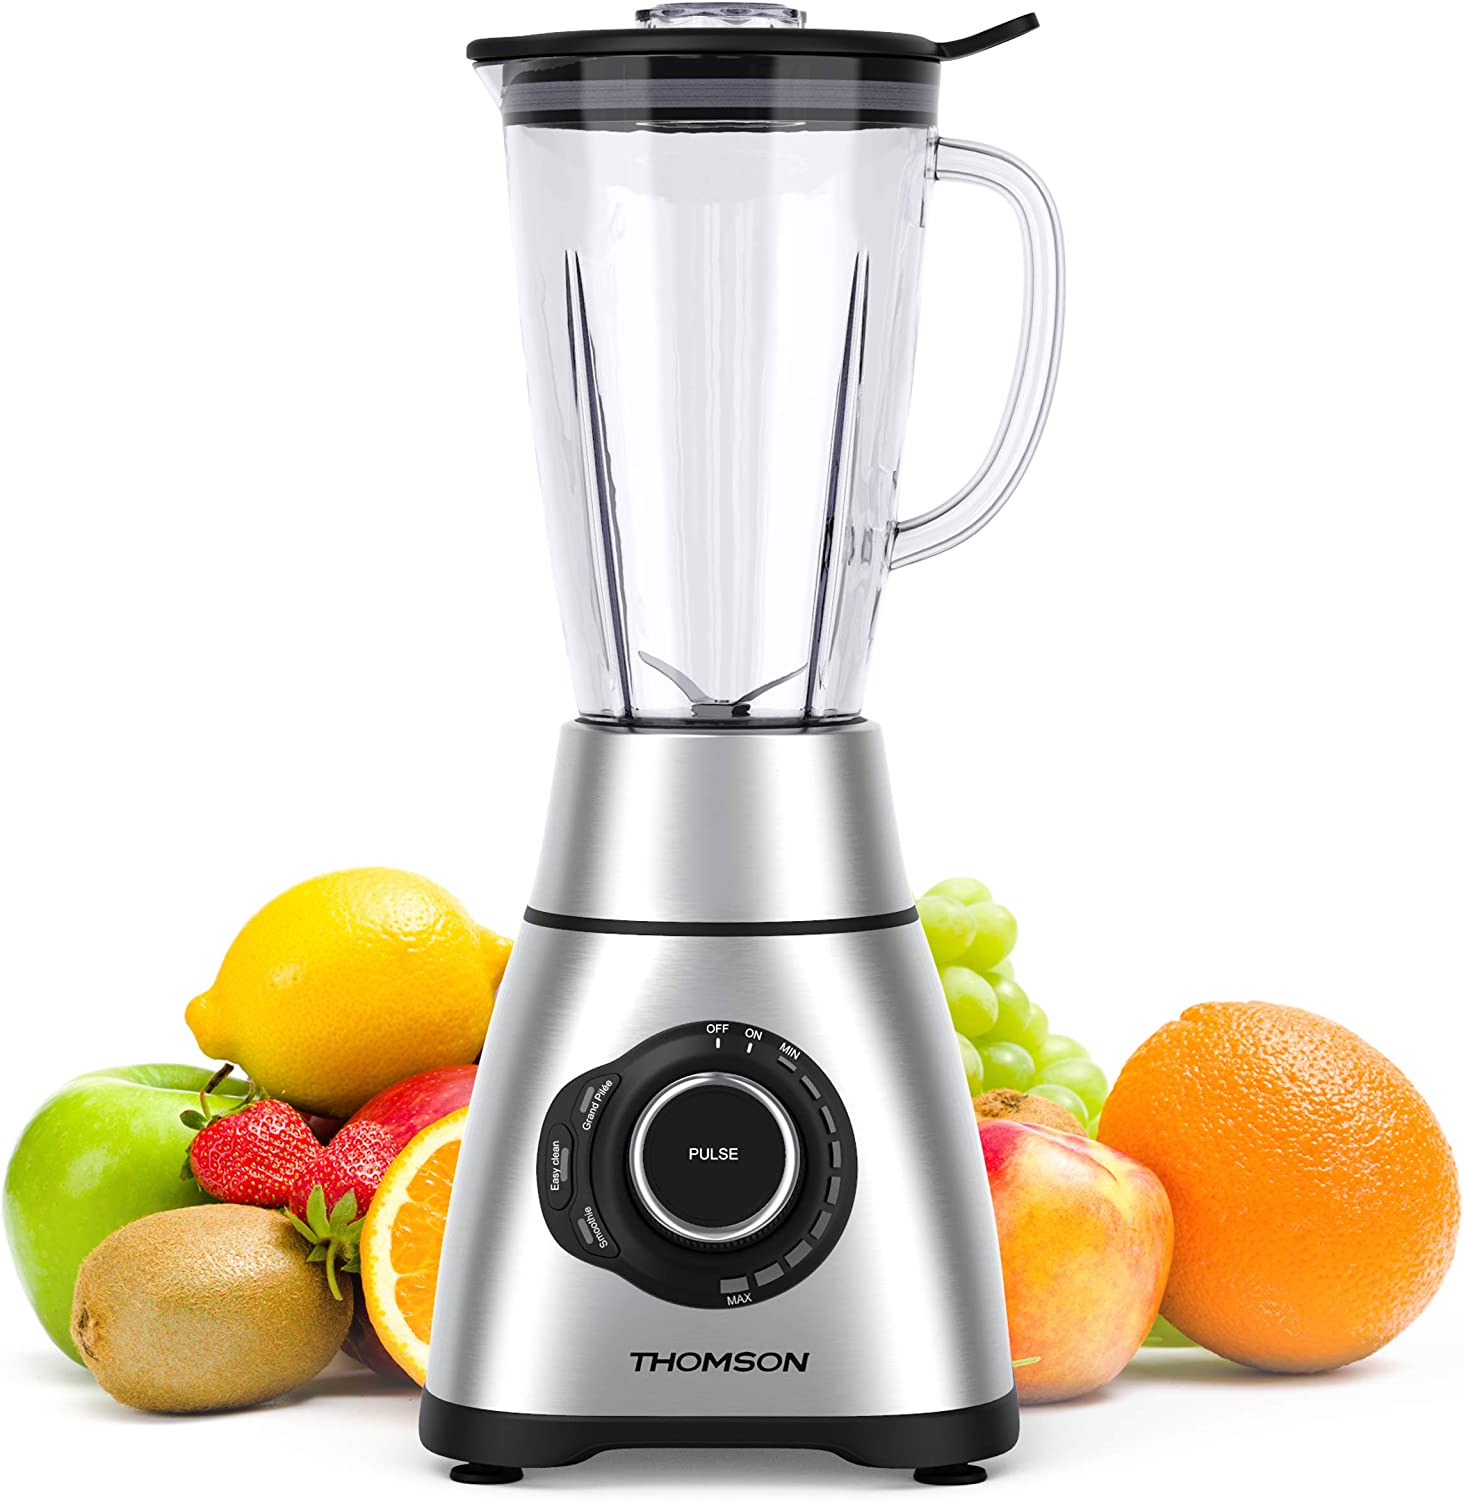 THOMSON THBL91818 Blender Glass (1.8 Litres) - High-Performance Blender with 22,000 Revolutions per Minute, Ideal as a Smoothie Maker or for Crushed Ice, Mixer with Stainless Steel Blade, Silver